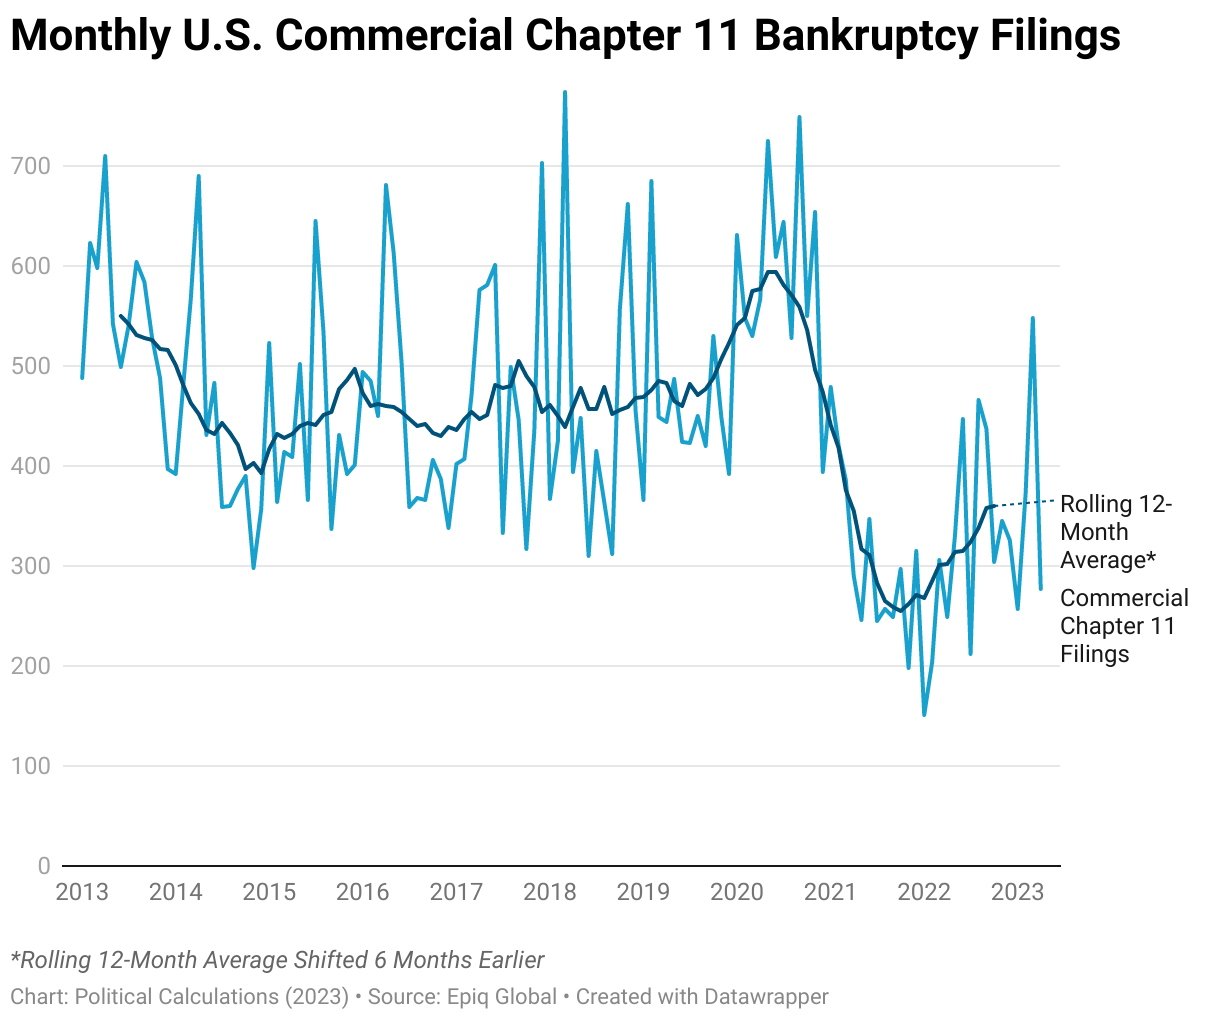 Monthly U.S. Commercial Chapter 11 Bankruptcy Filings, January 2013 - April 2023